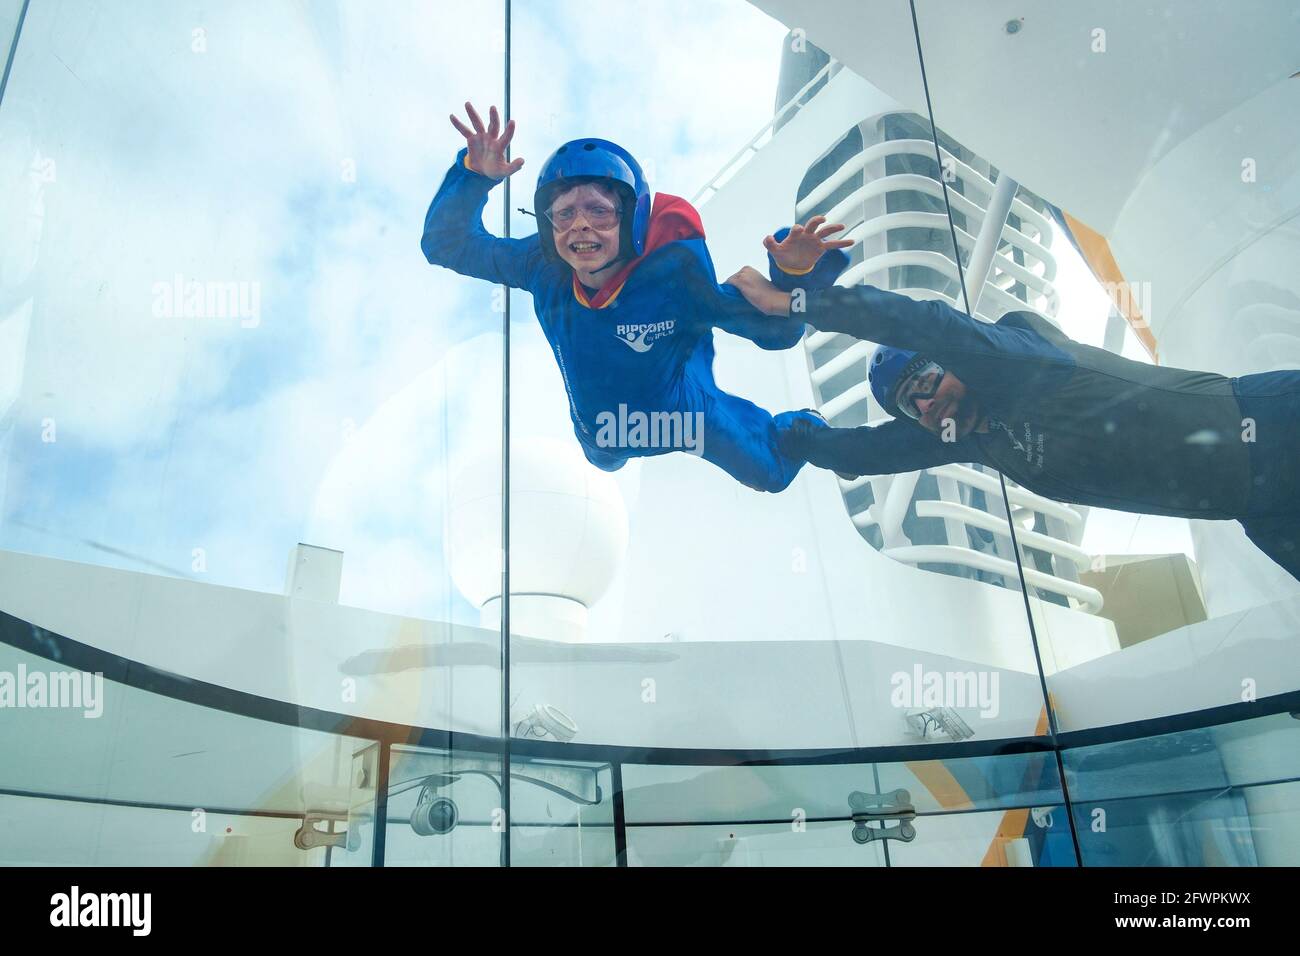 A young boy simulating a skydive in a vertical wind tunnel on board Royal Caribbean ship, Anthem of the Seas. Stock Photo